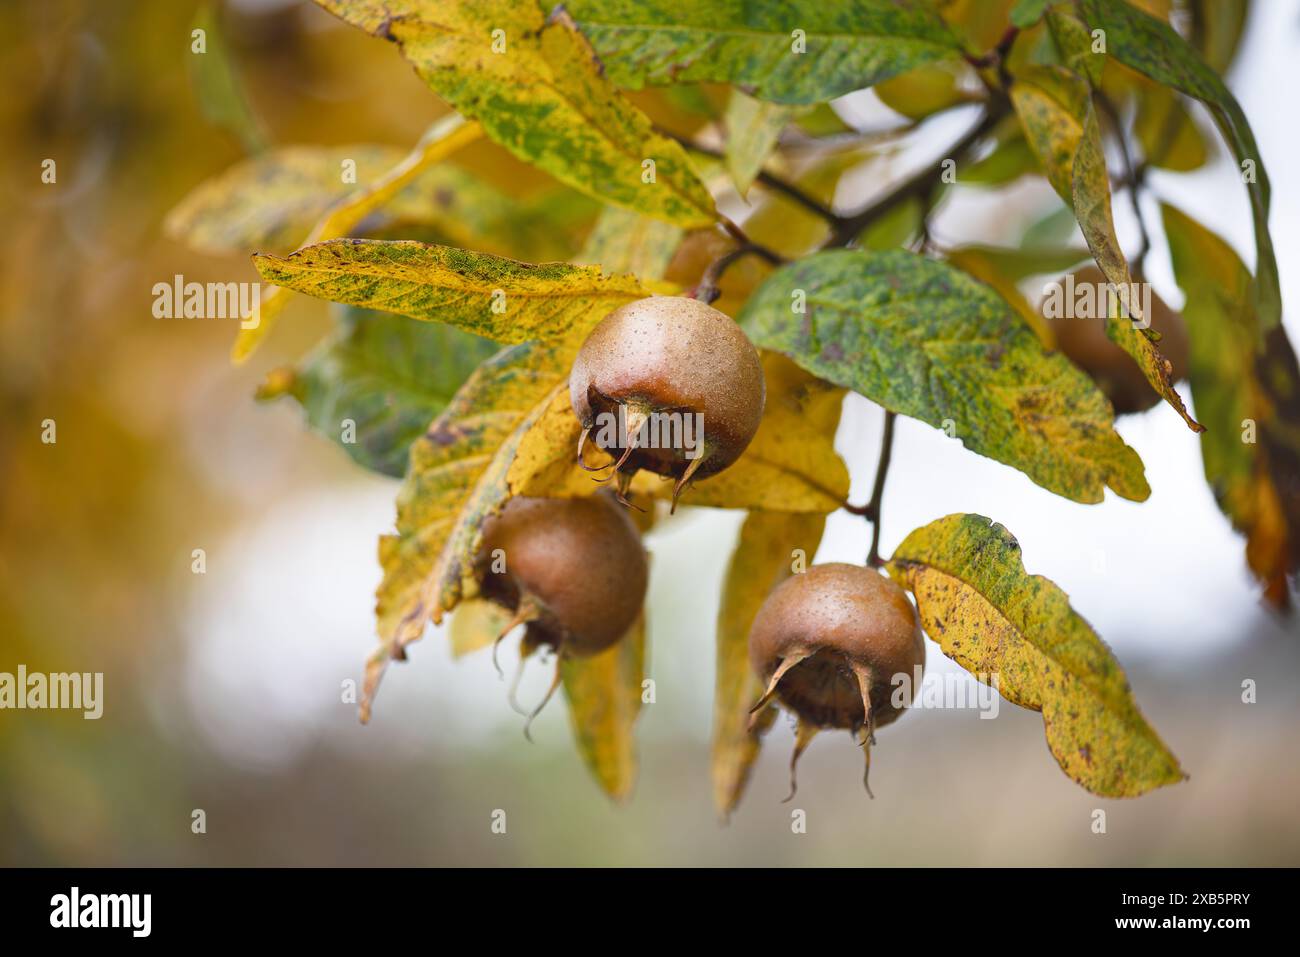 Medlar brown ripe fruits with yellow leaves grow on the tree in an autumn cottage garden. (Mespilus germanica) Copy space. Stock Photo